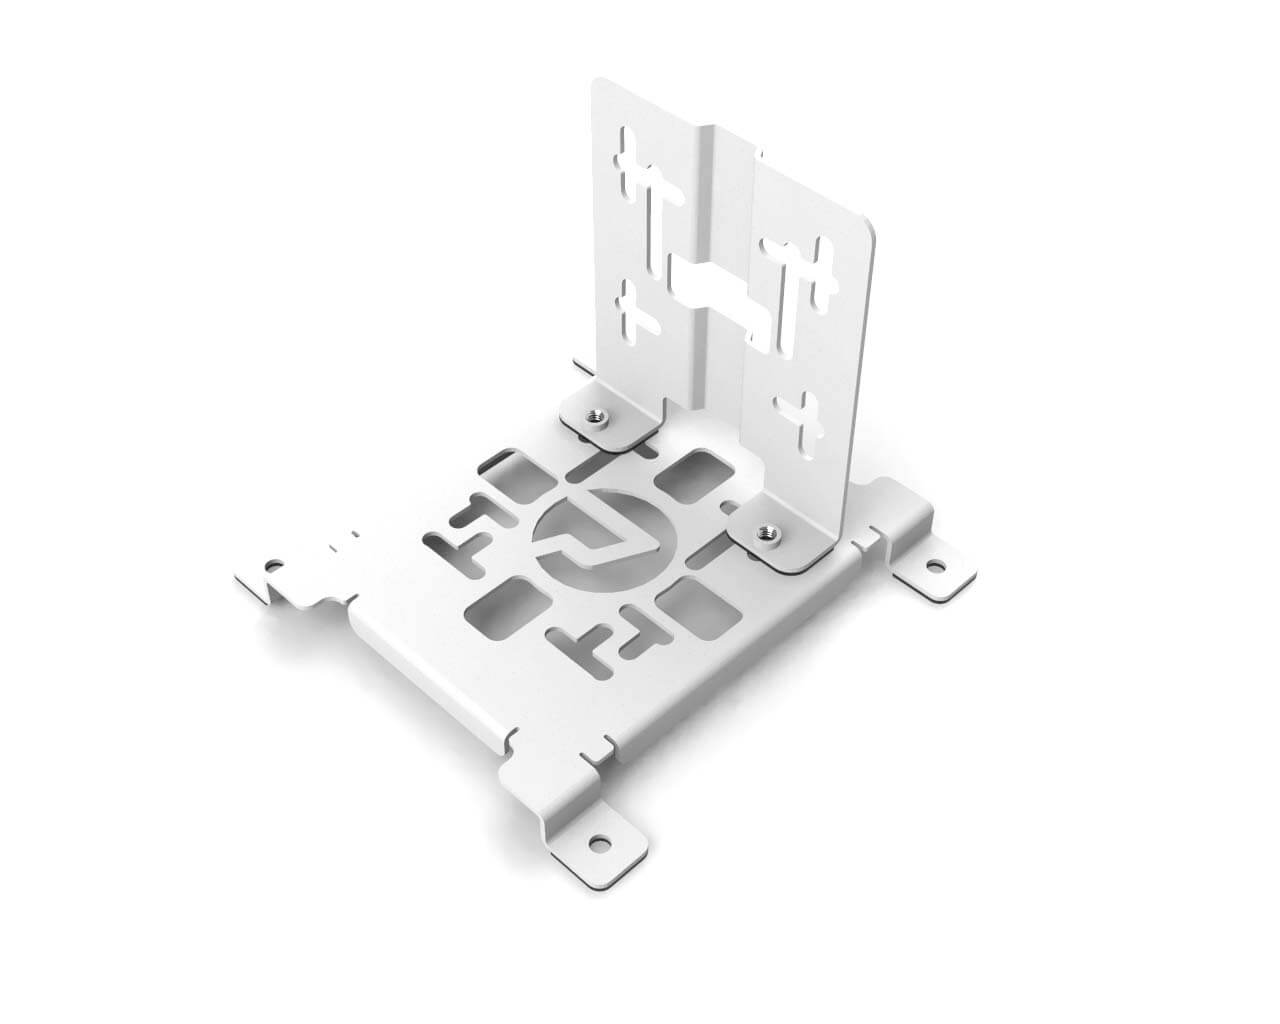 PrimoChill SX Universal Spider Mount Bracket Kit - 120mm Series - PrimoChill - KEEPING IT COOL Sky White